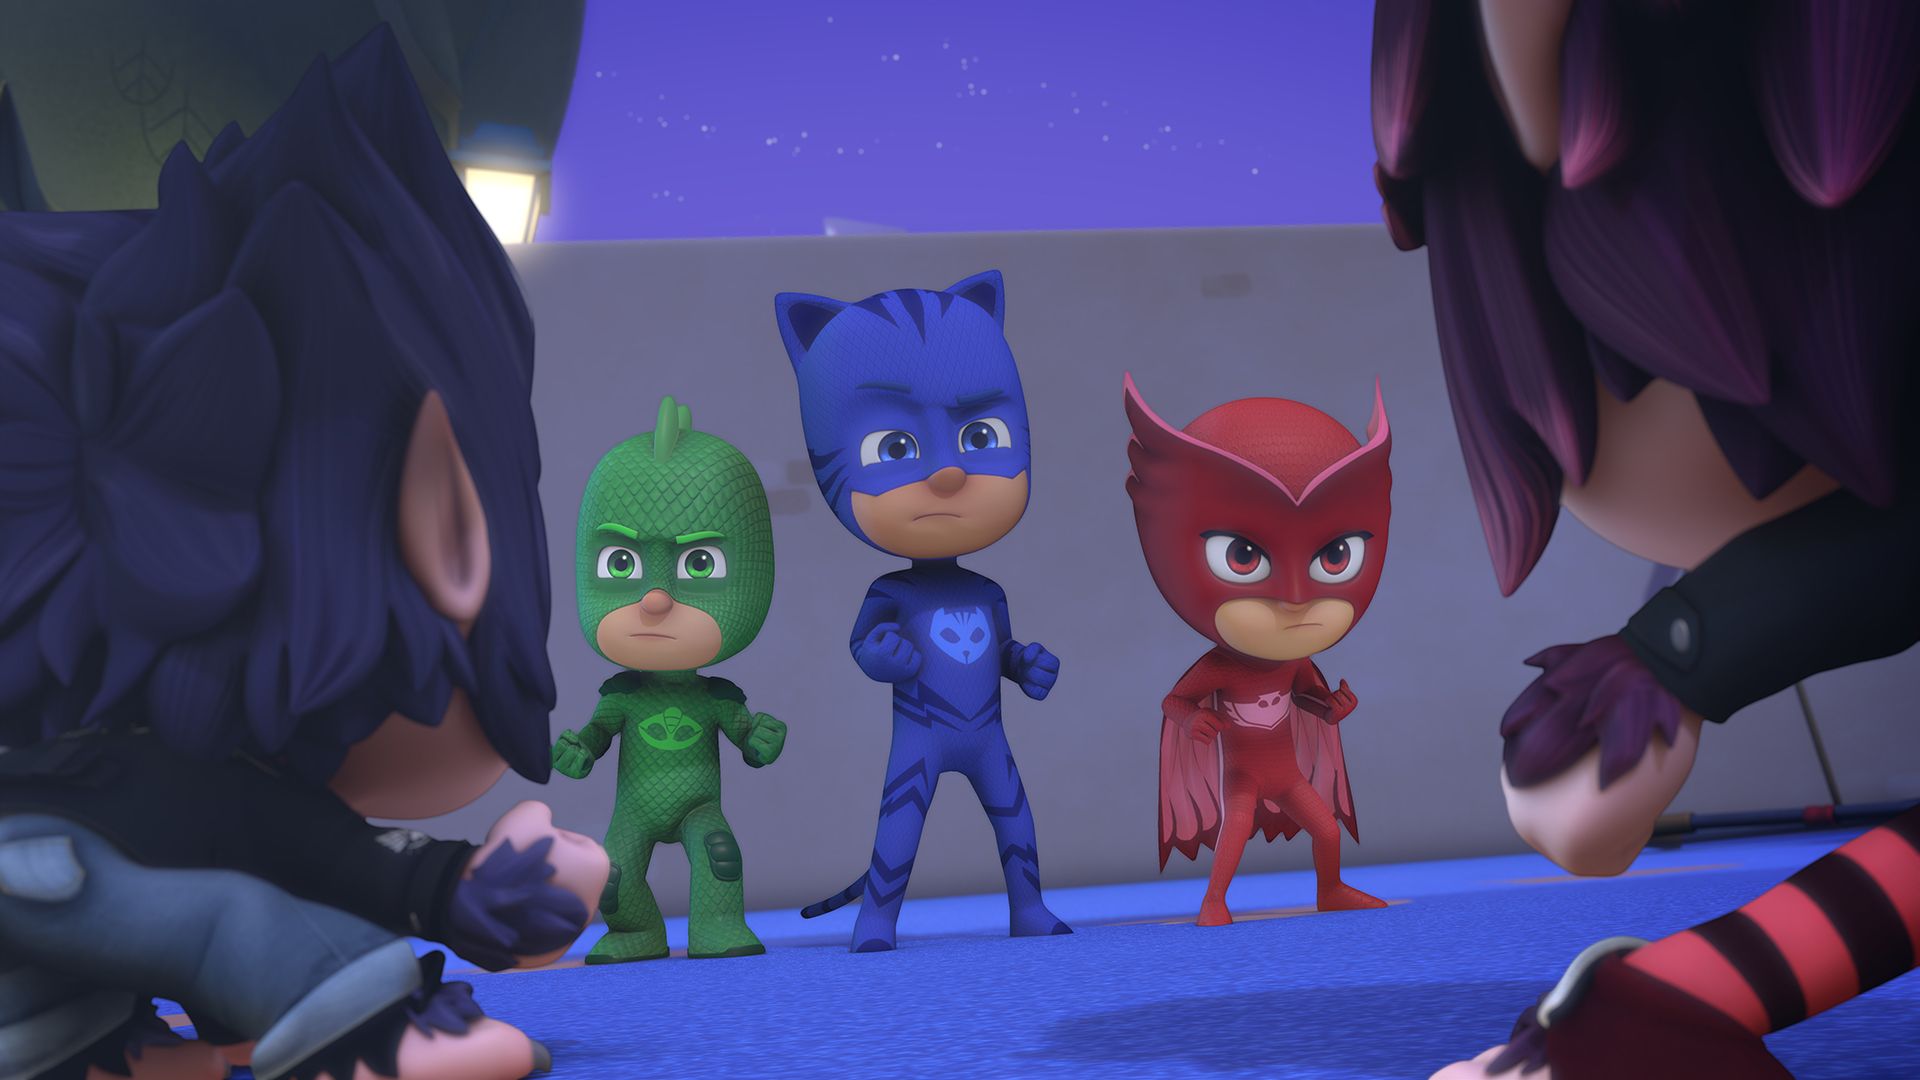 PJ Masks: New Episodes Feature the Wolfy Kids on Disney Junior